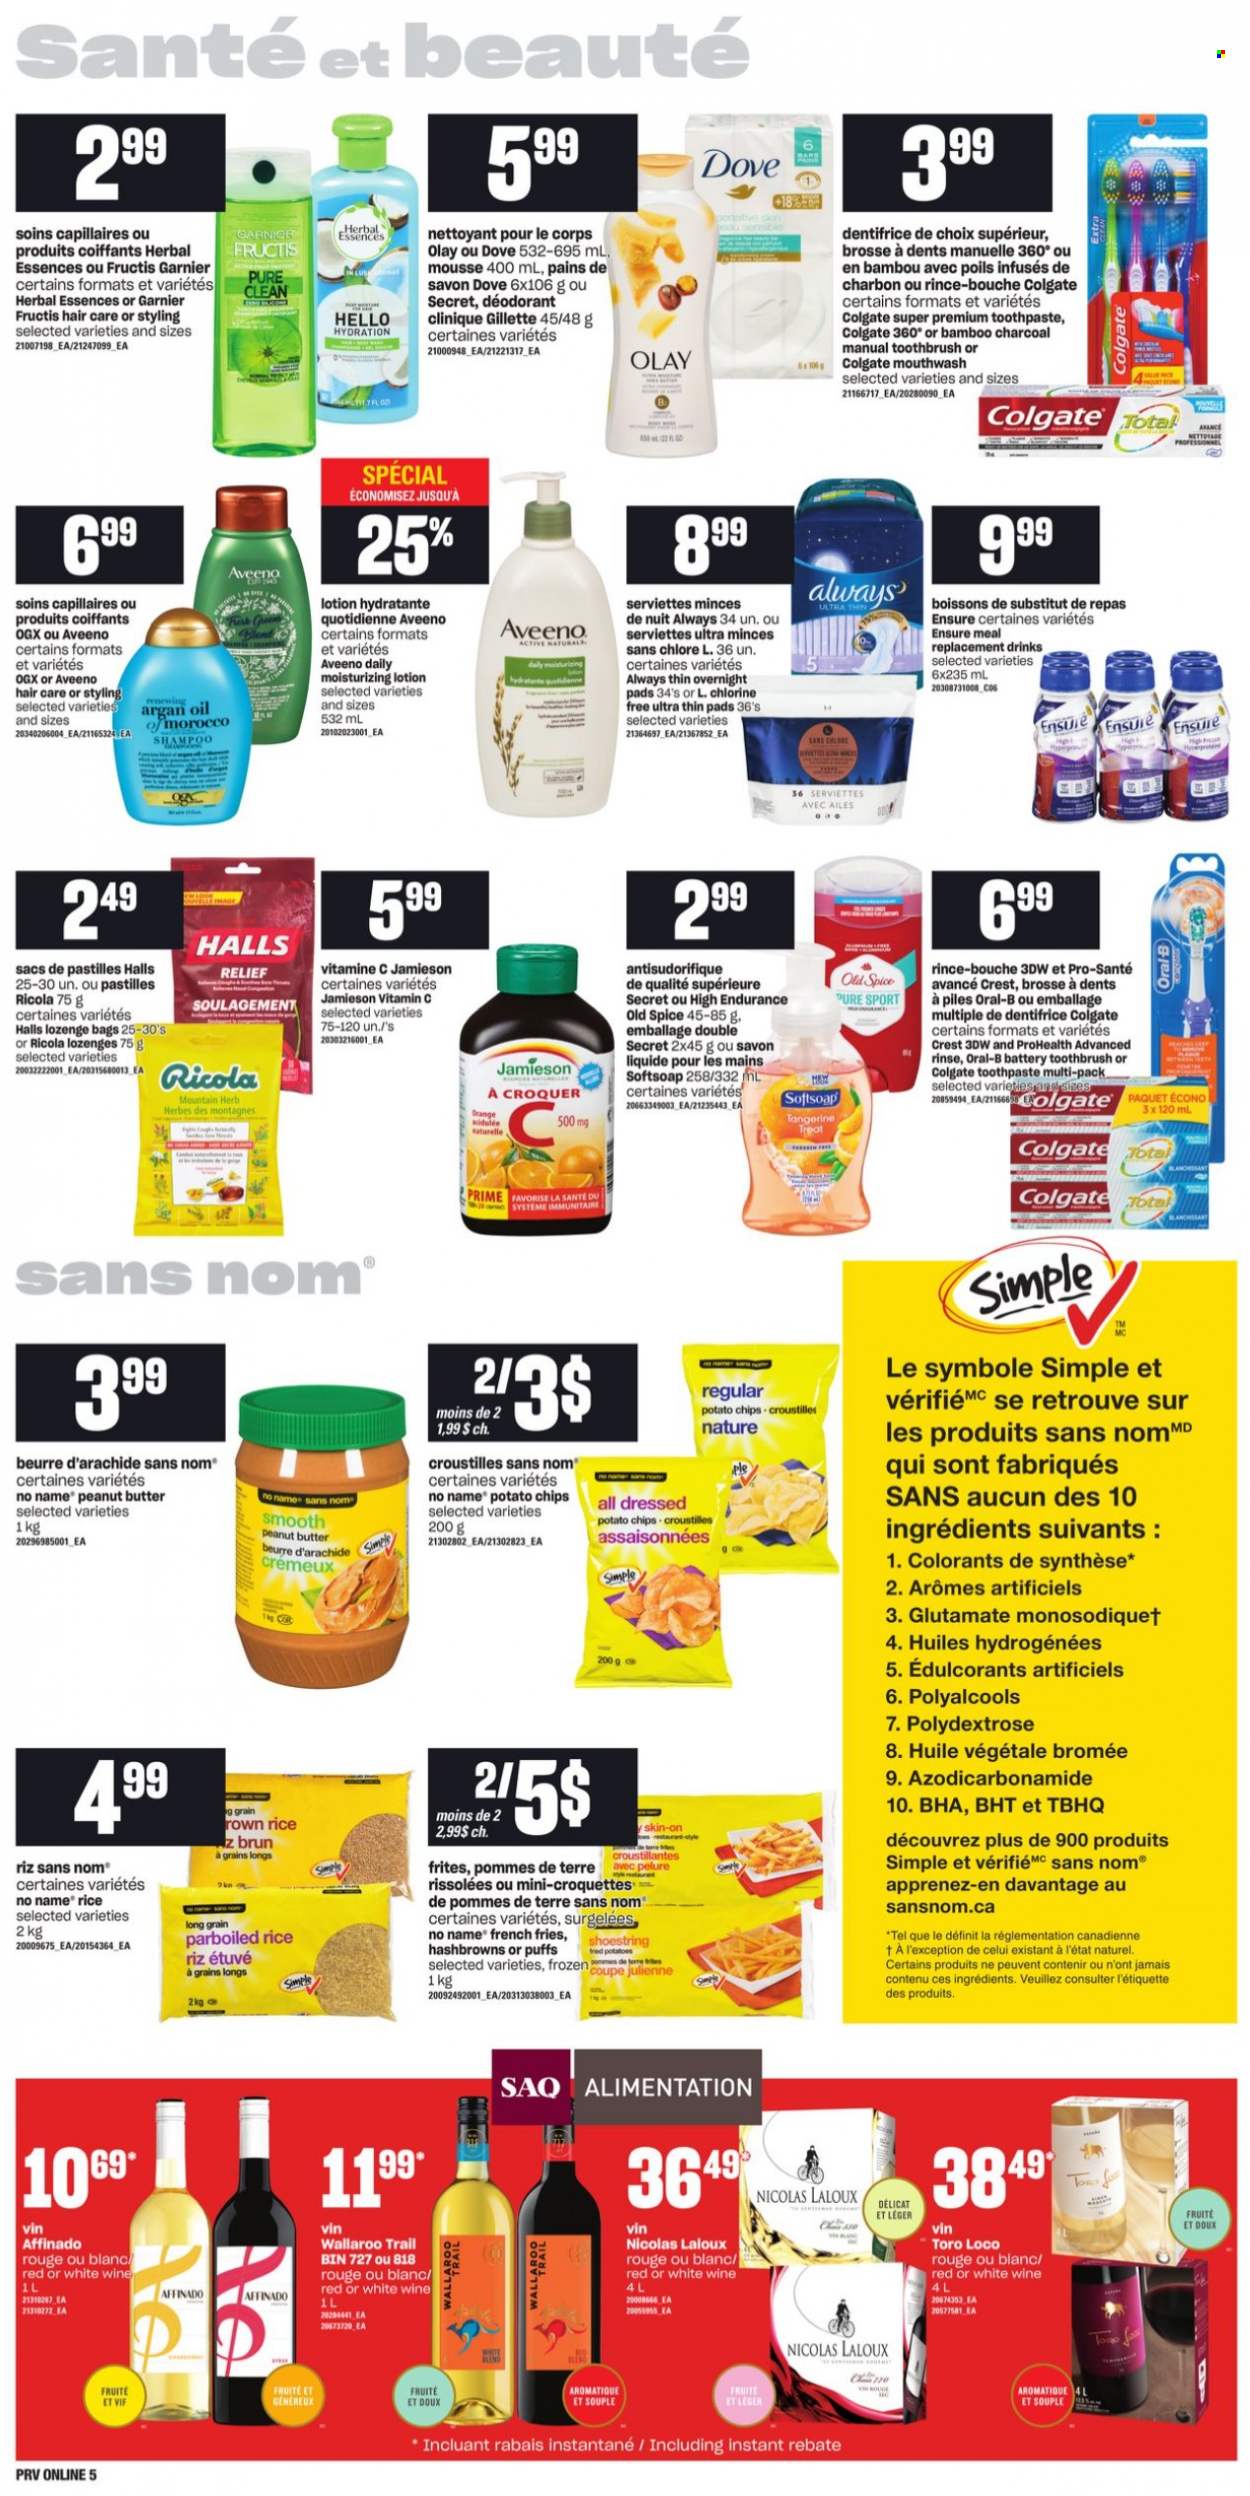 thumbnail - Provigo Flyer - September 23, 2021 - September 29, 2021 - Sales products - puffs, No Name, hash browns, potato fries, french fries, potato croquettes, Ricola, Halls, pastilles, potato chips, rice, parboiled rice, spice, wine, Aveeno, Softsoap, toothbrush, toothpaste, mouthwash, Crest, sanitary pads, Clinique, Olay, OGX, Herbal Essences, Fructis, body lotion, anti-perspirant, vitamin c, argan oil, Dove, Colgate, Garnier, Gillette, shampoo, Old Spice, Oral-B, oranges, deodorant. Page 9.